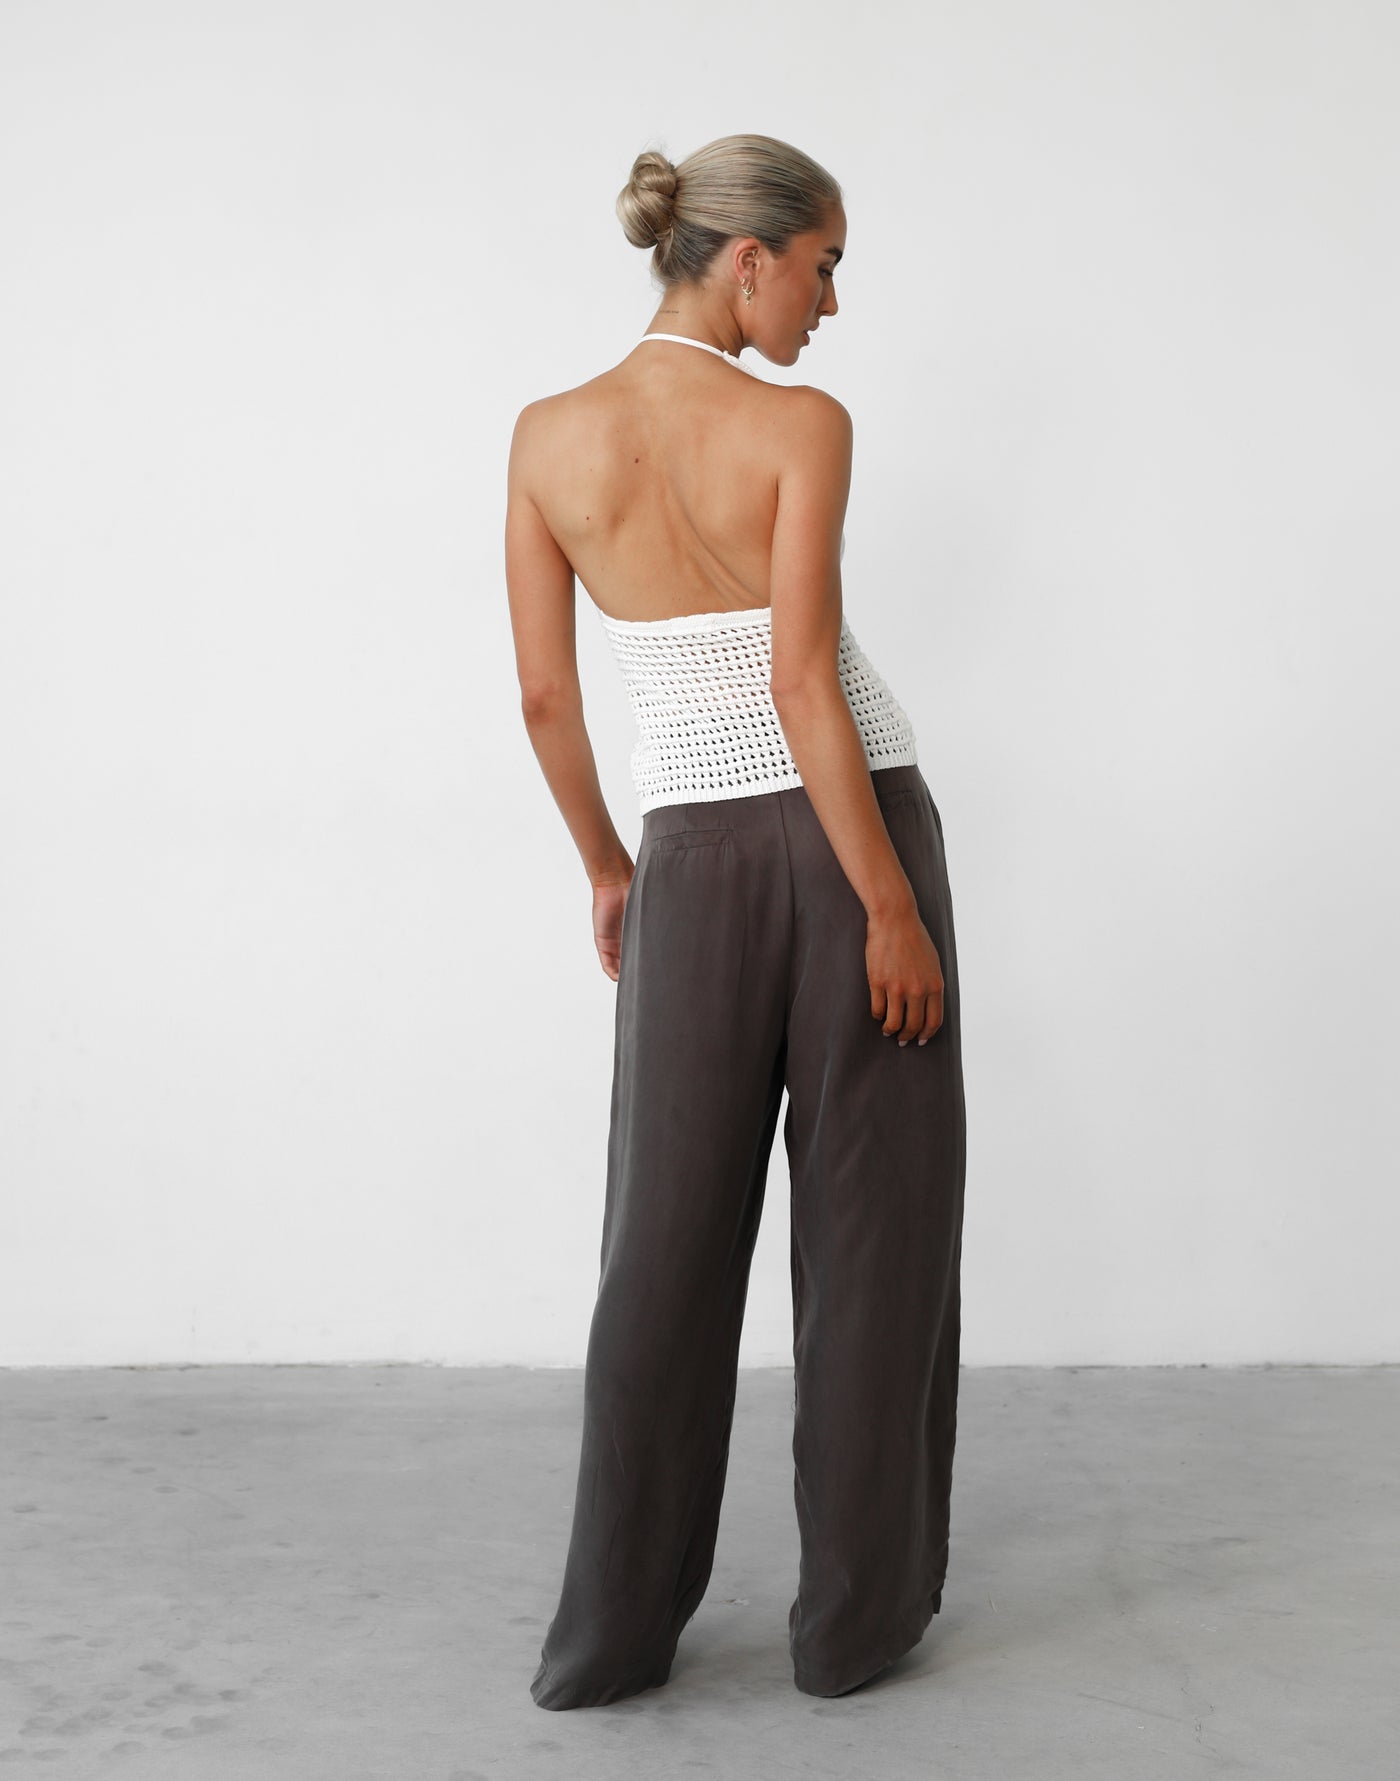 Wild Soul Crochet Top (White) - V-neck Tie-up Top - Women's Top - Charcoal Clothing